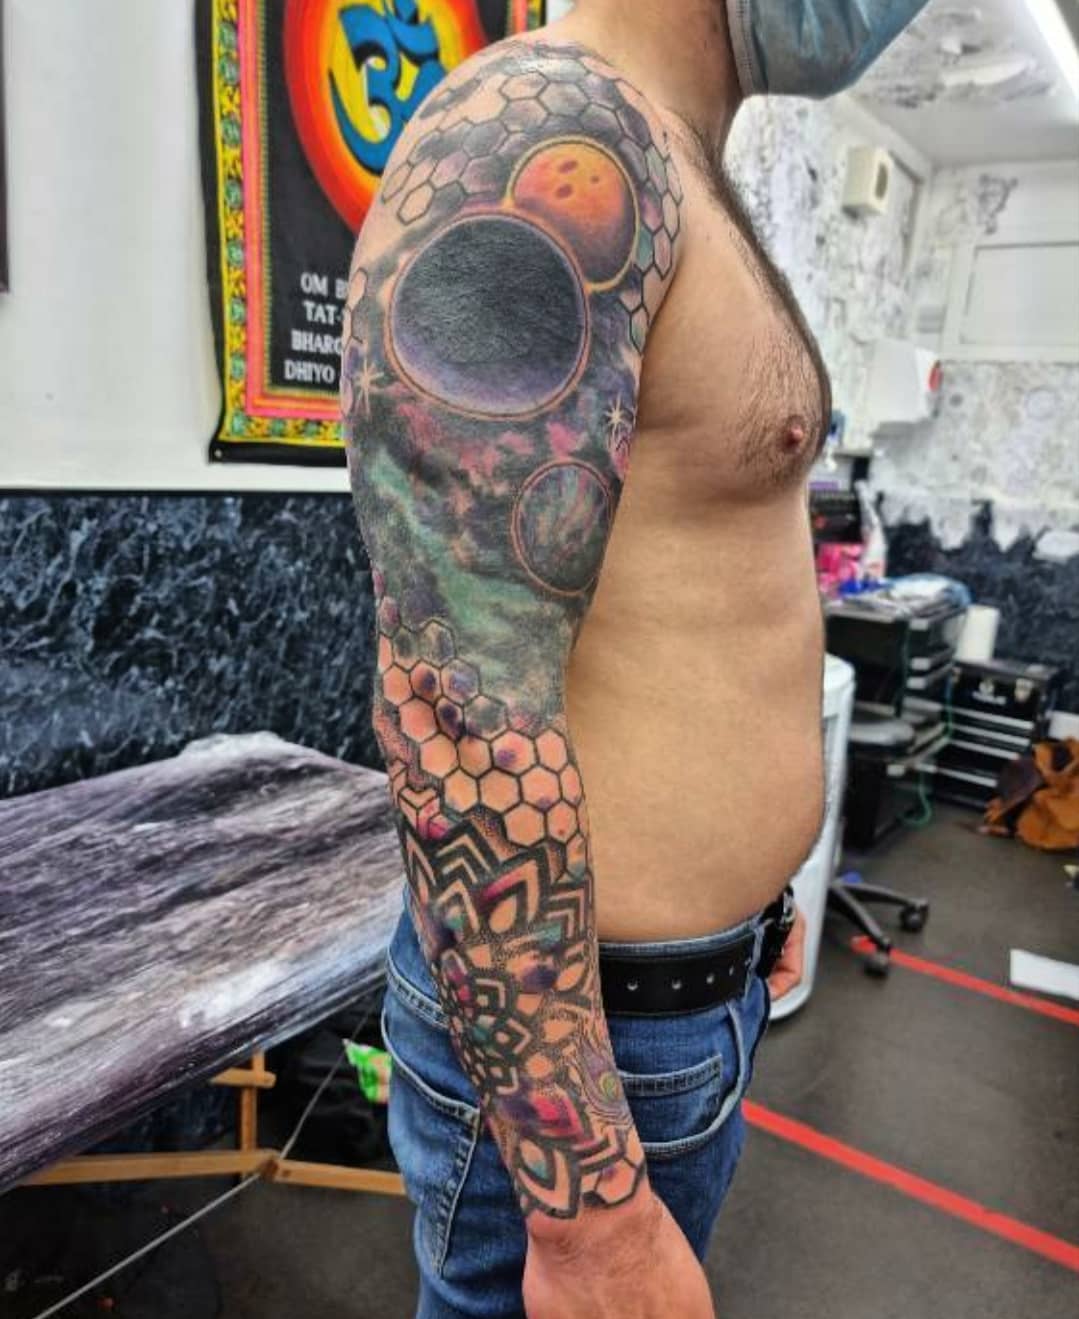 Had a great time finishing up this double coverup cosmic geometry sleeve project on all round top guy seanbisset1 a week or two ago- was a blast thank you man 🙏🙏🙏 done studioxiiigallery 🙌
.
.
. 
                       